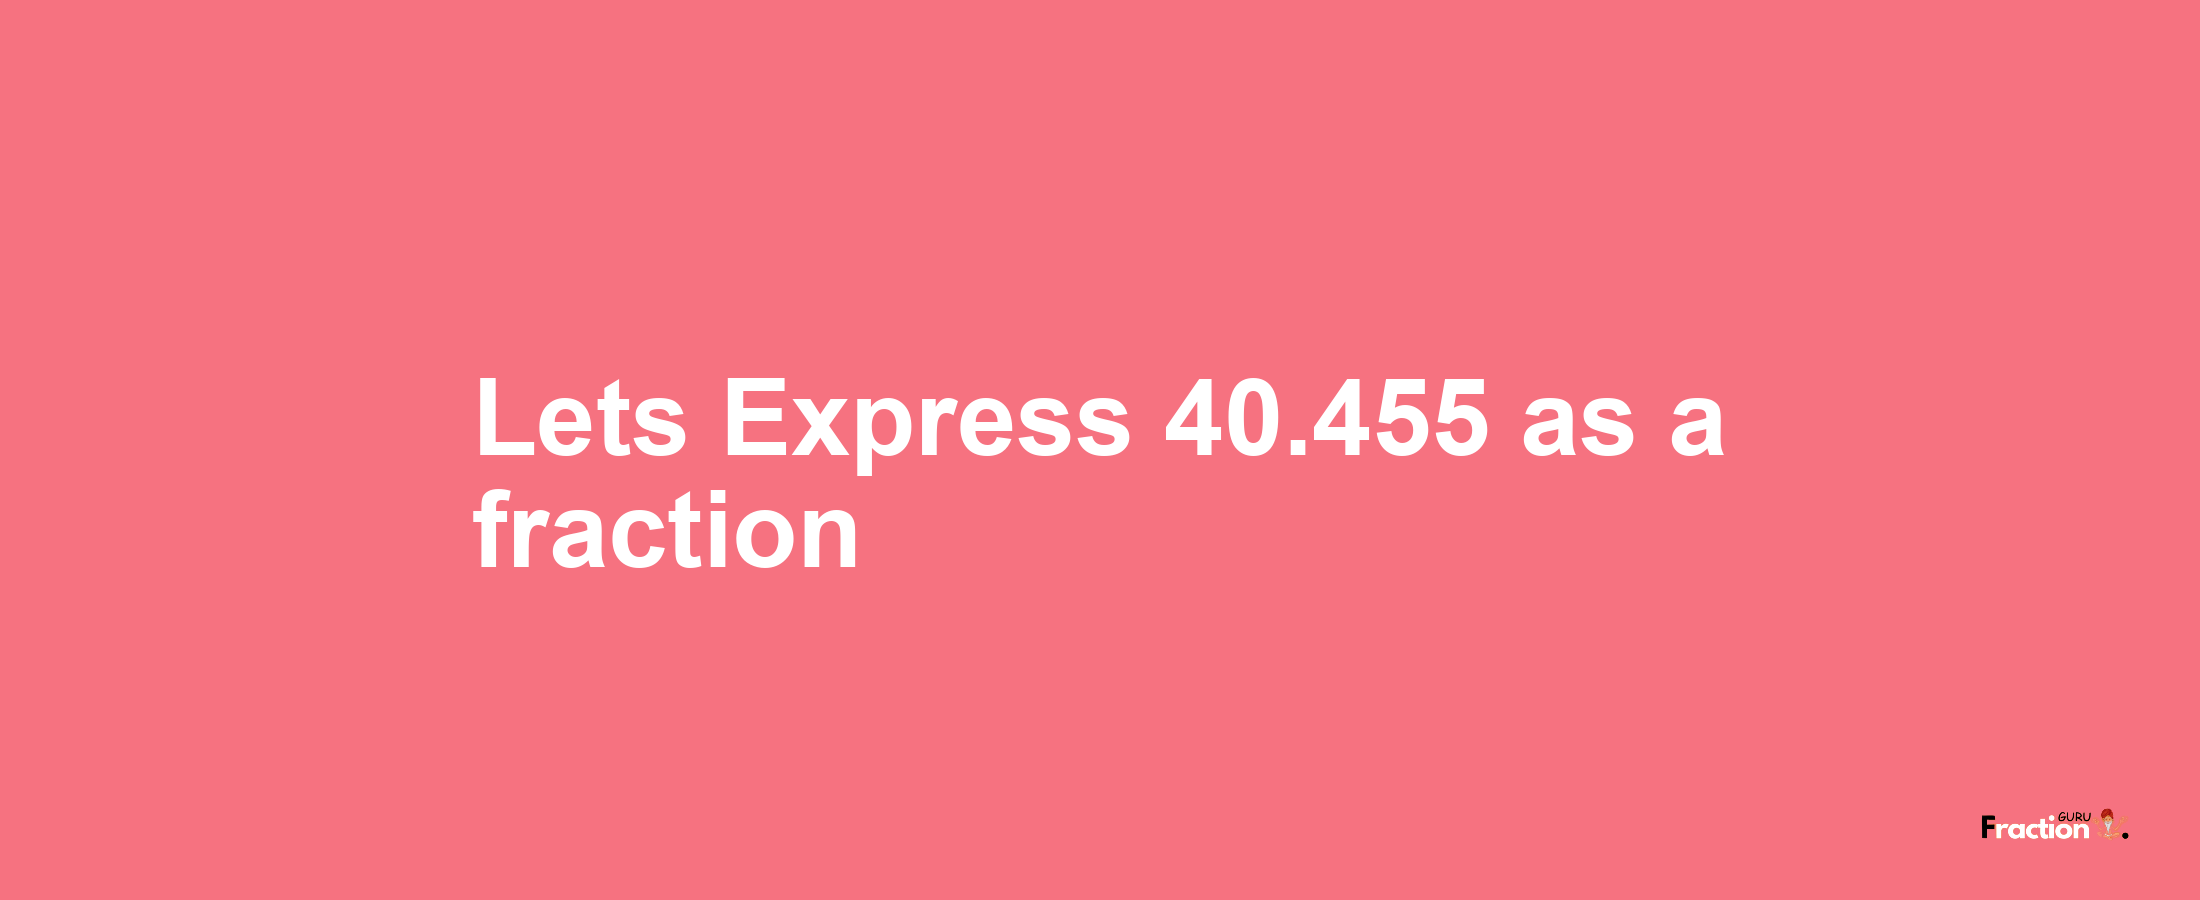 Lets Express 40.455 as afraction